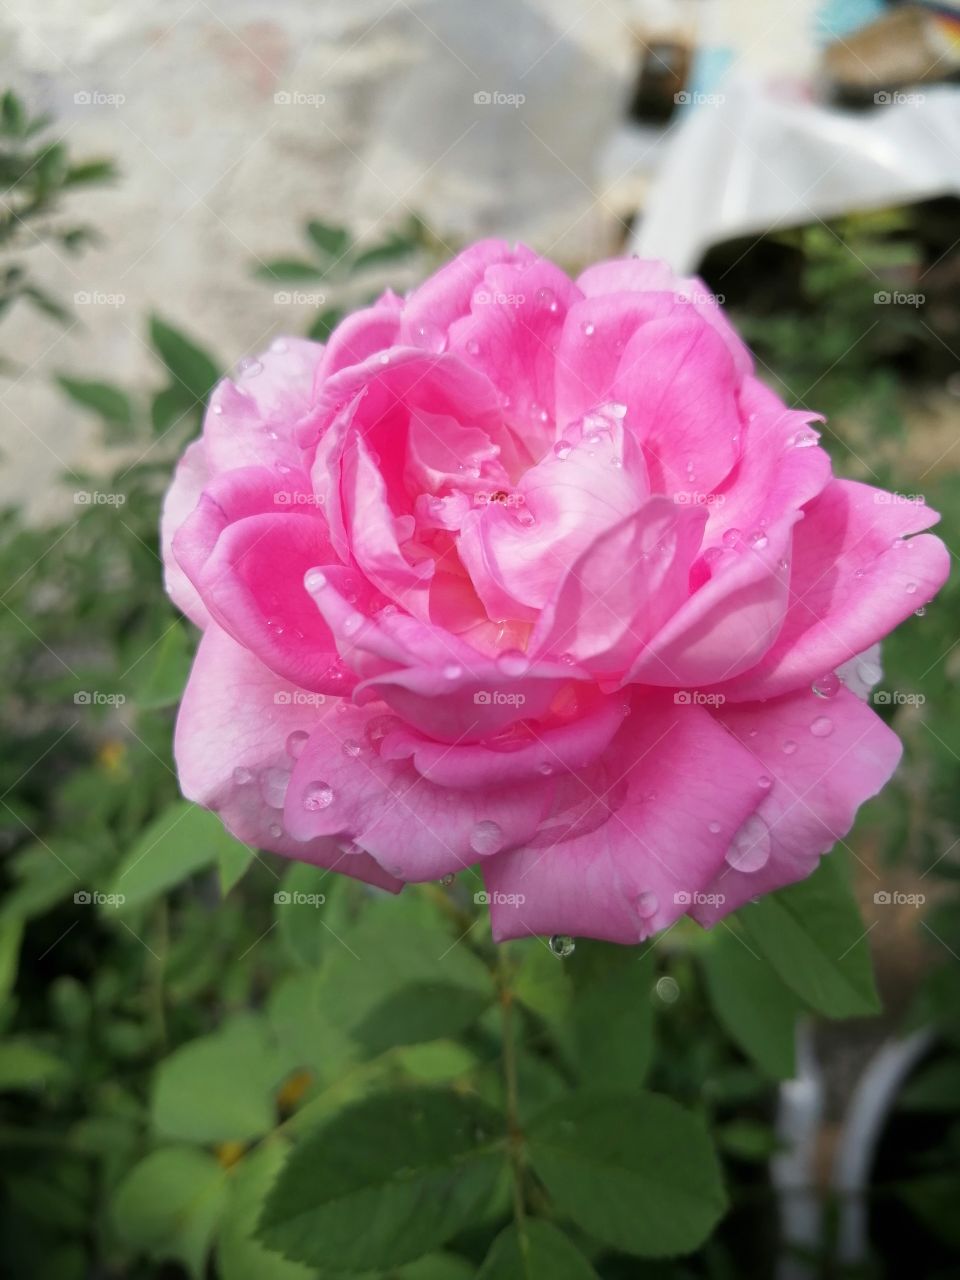 Odd numbers. 1 beautiful pink colour rose flower.